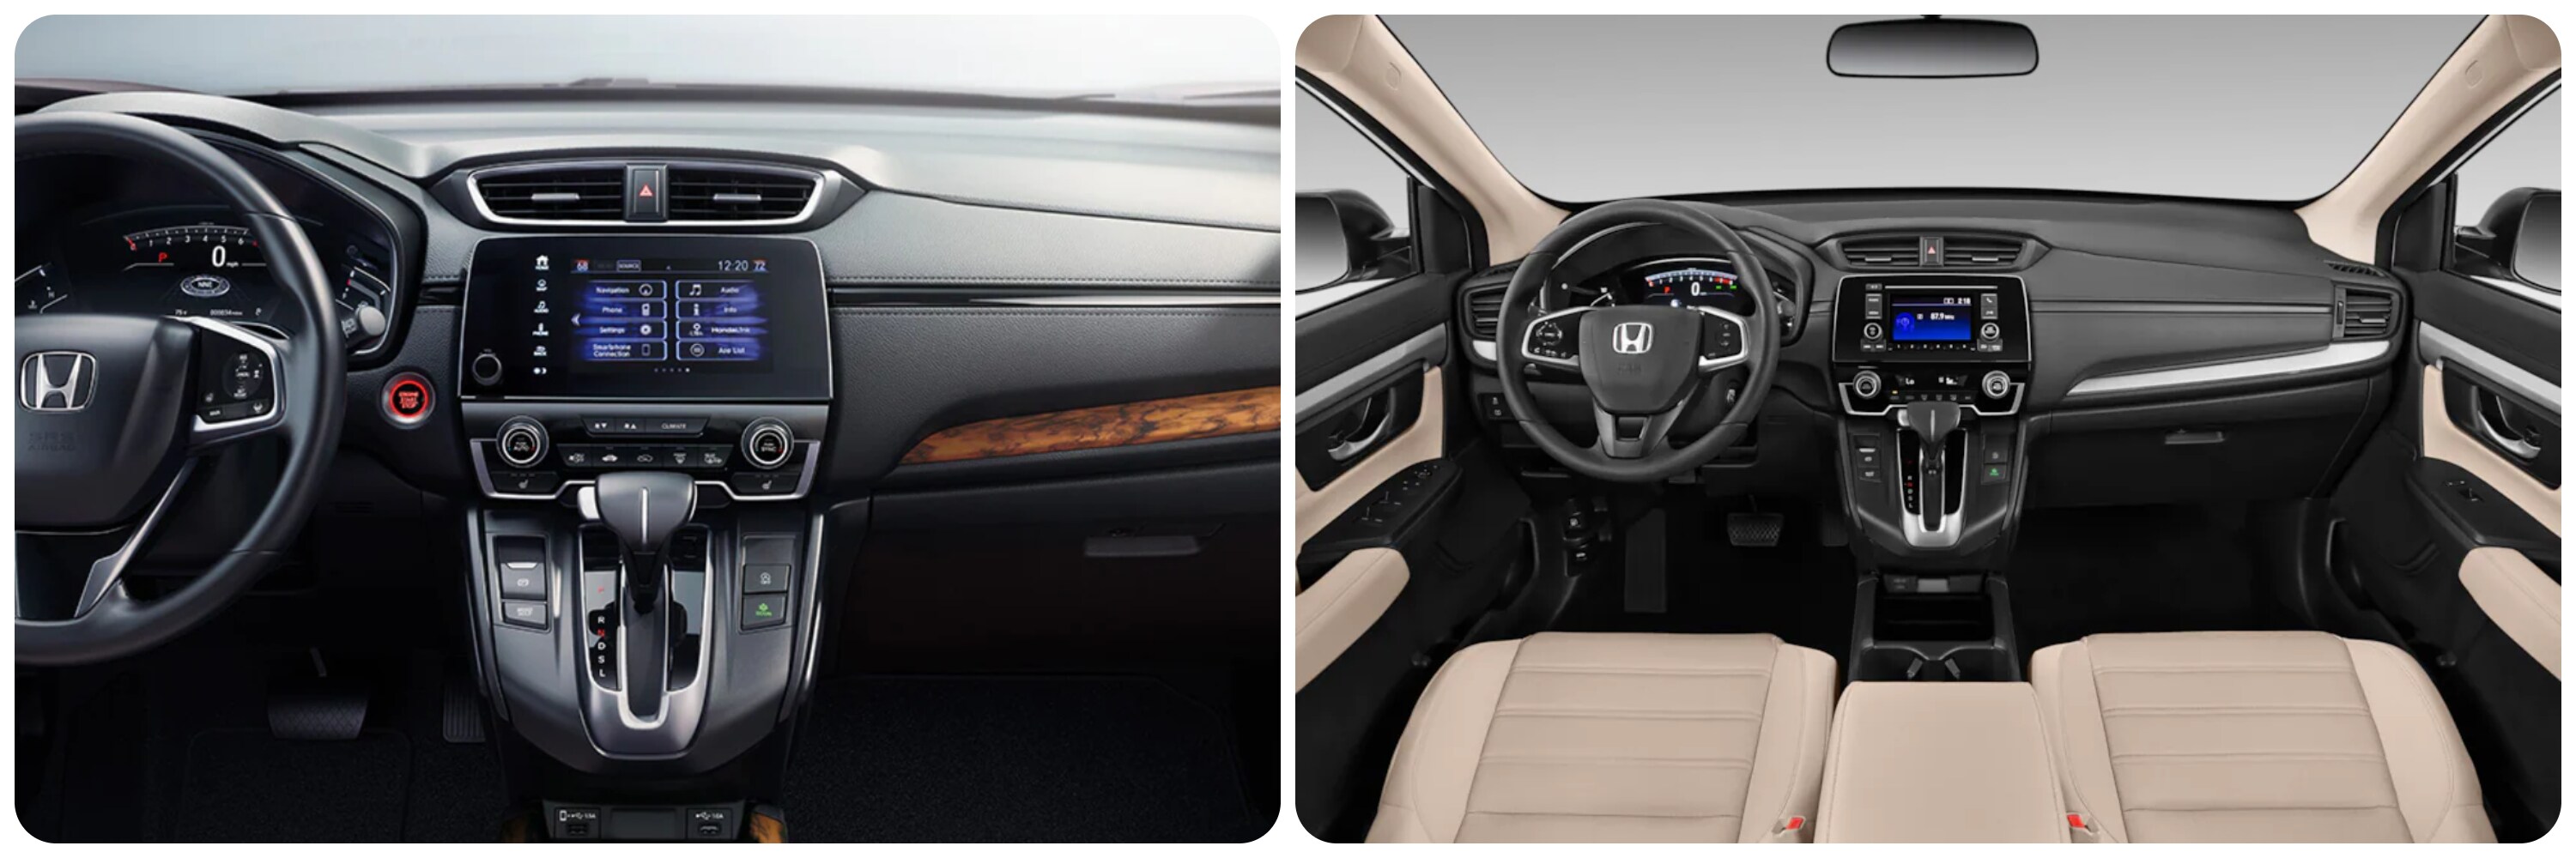 On the left a view of an all black dash with burled wood accents in a 2022 Honda CR-V and on the right a view of the black dash with chrome accents of a 2021 Honda CR-V with tan leather upholstery